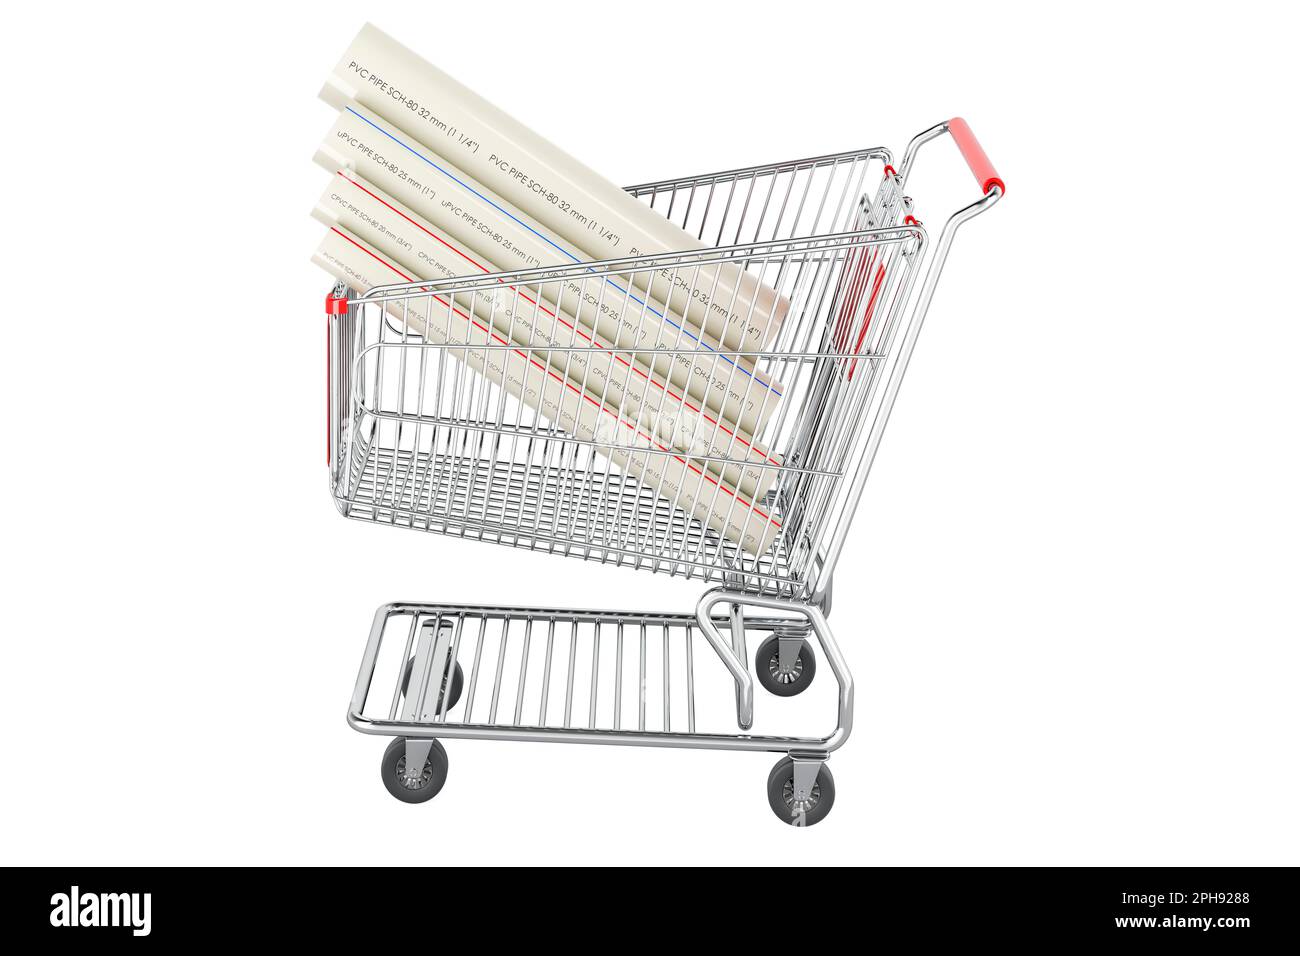 PVC pipes, composite pipe, uPVC pipe, cPVC pipe inside shopping cart, 3D rendering isolated on white background Stock Photo